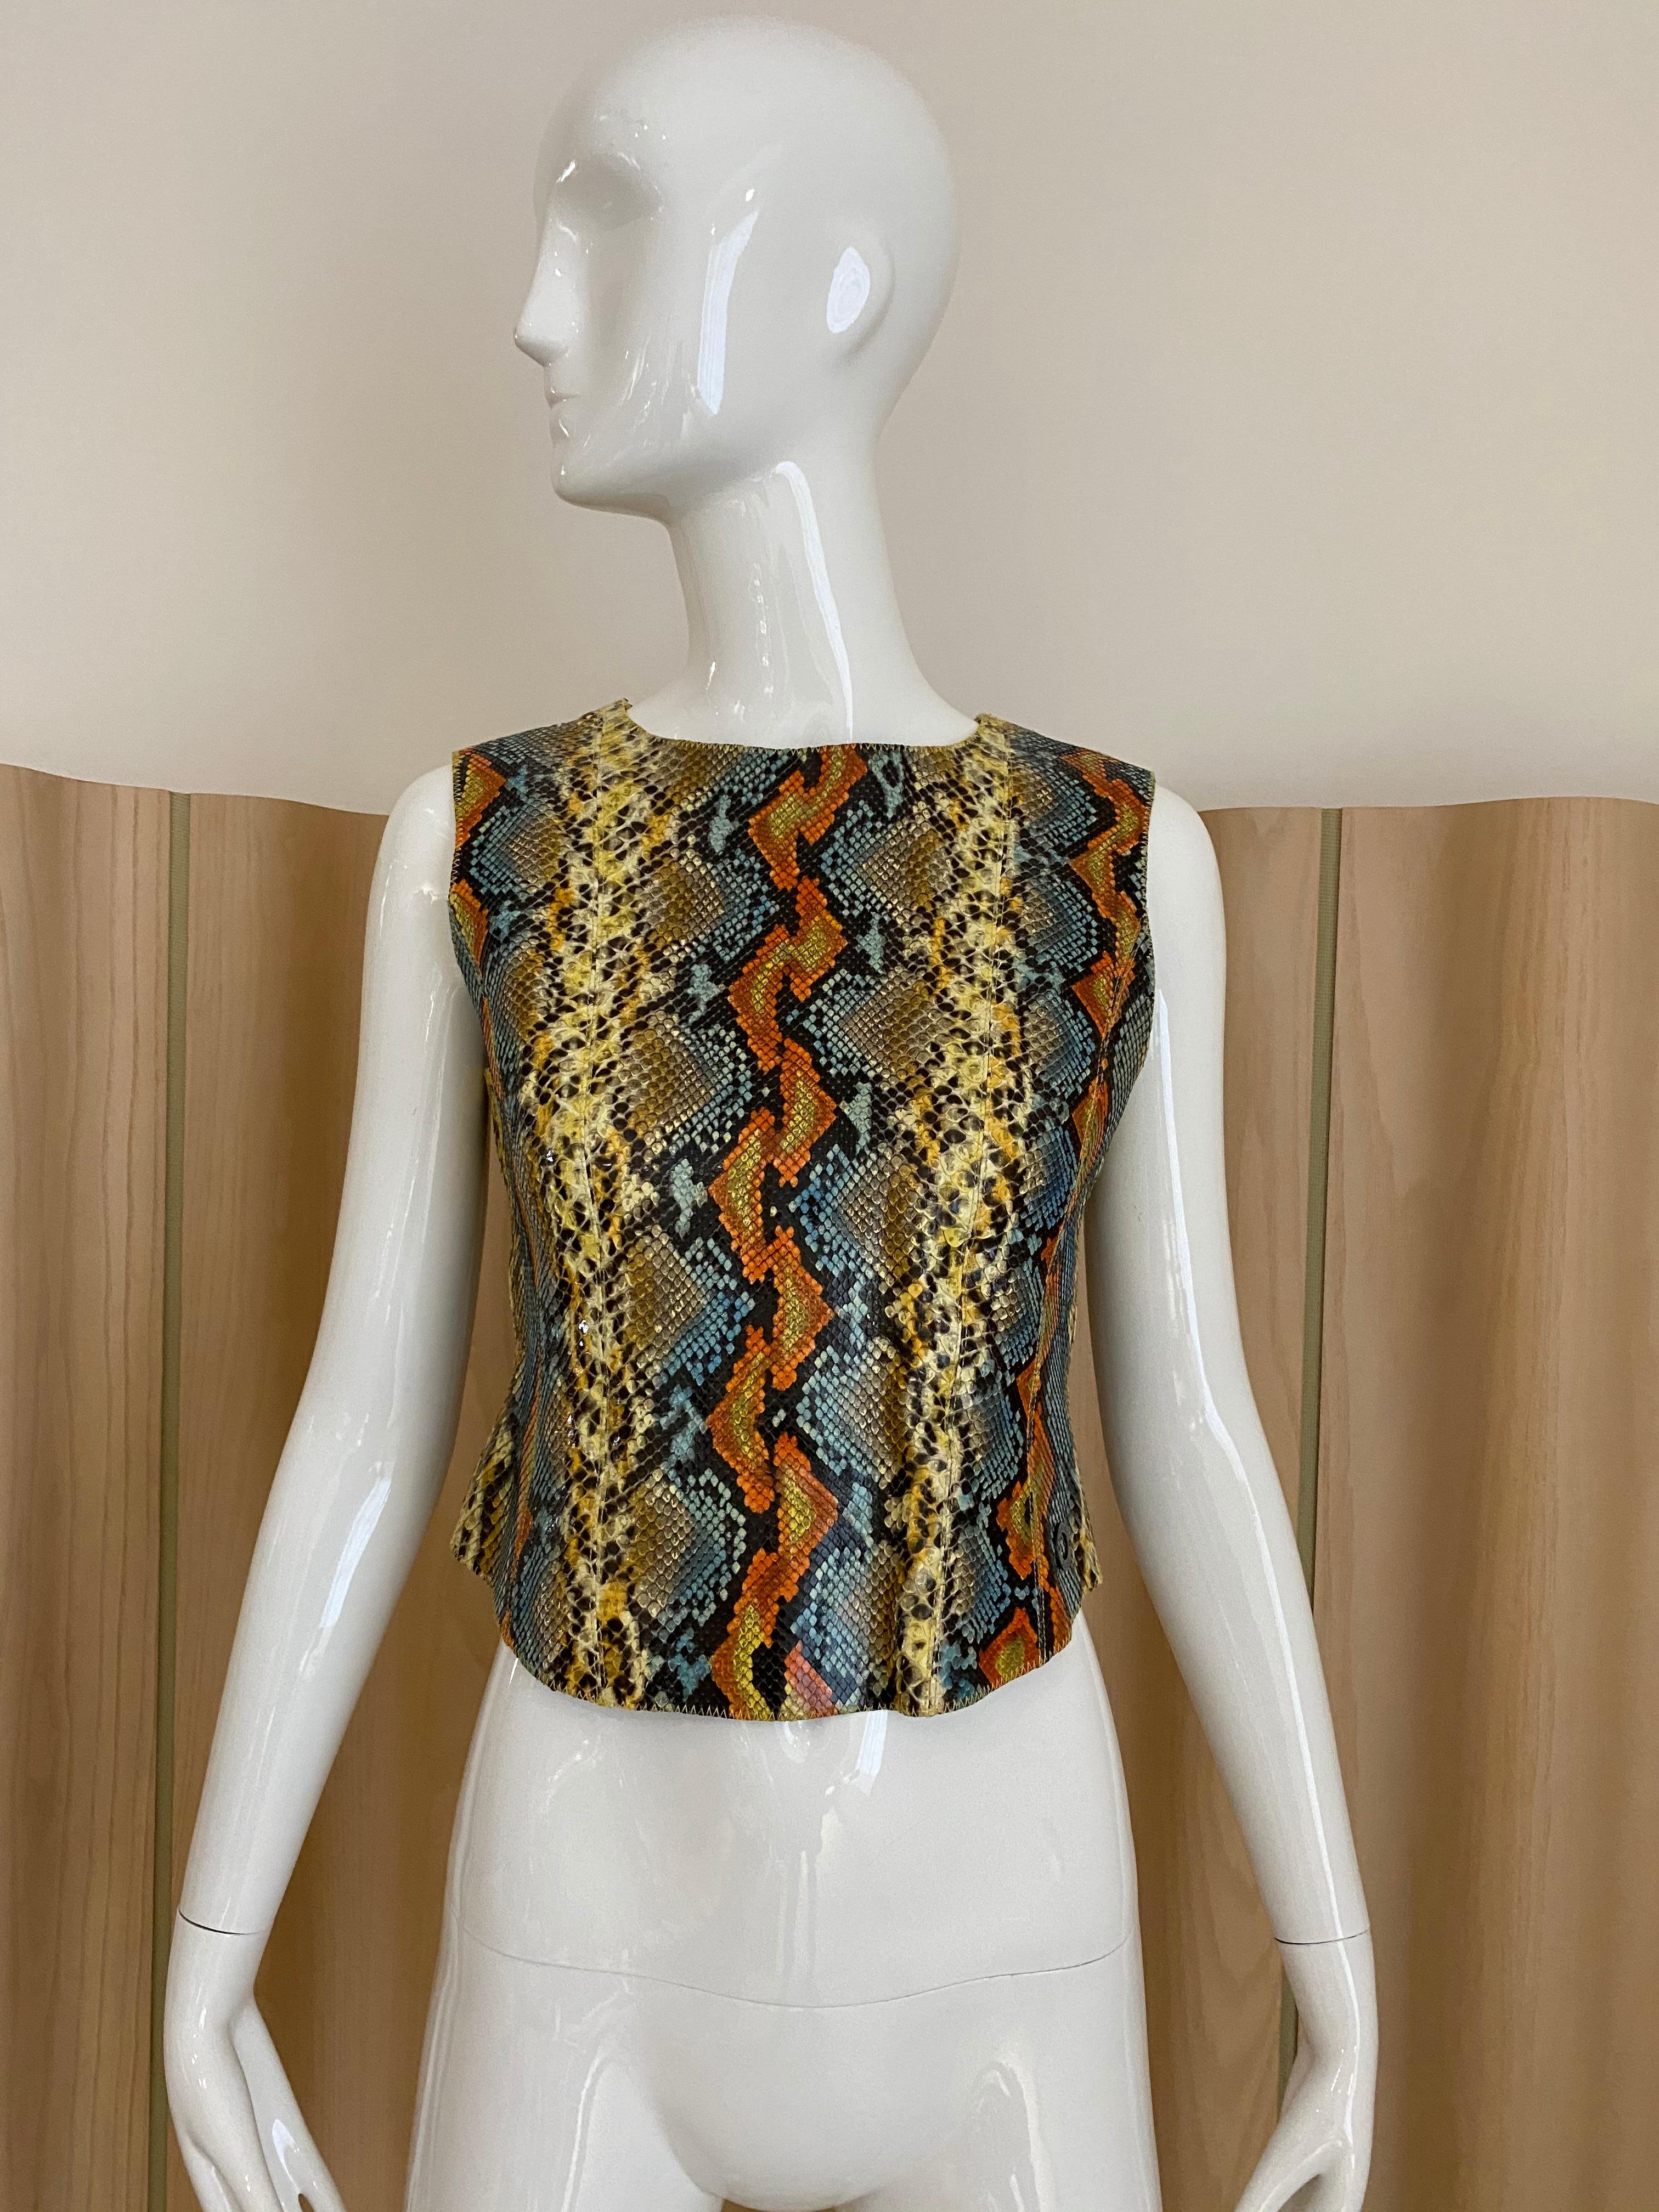 90s Chanel snake skin top in orange, blue, yellow, and black. 
Top lined in silk . 
Size: US 4
*** some stains in lining. please see Image attached,